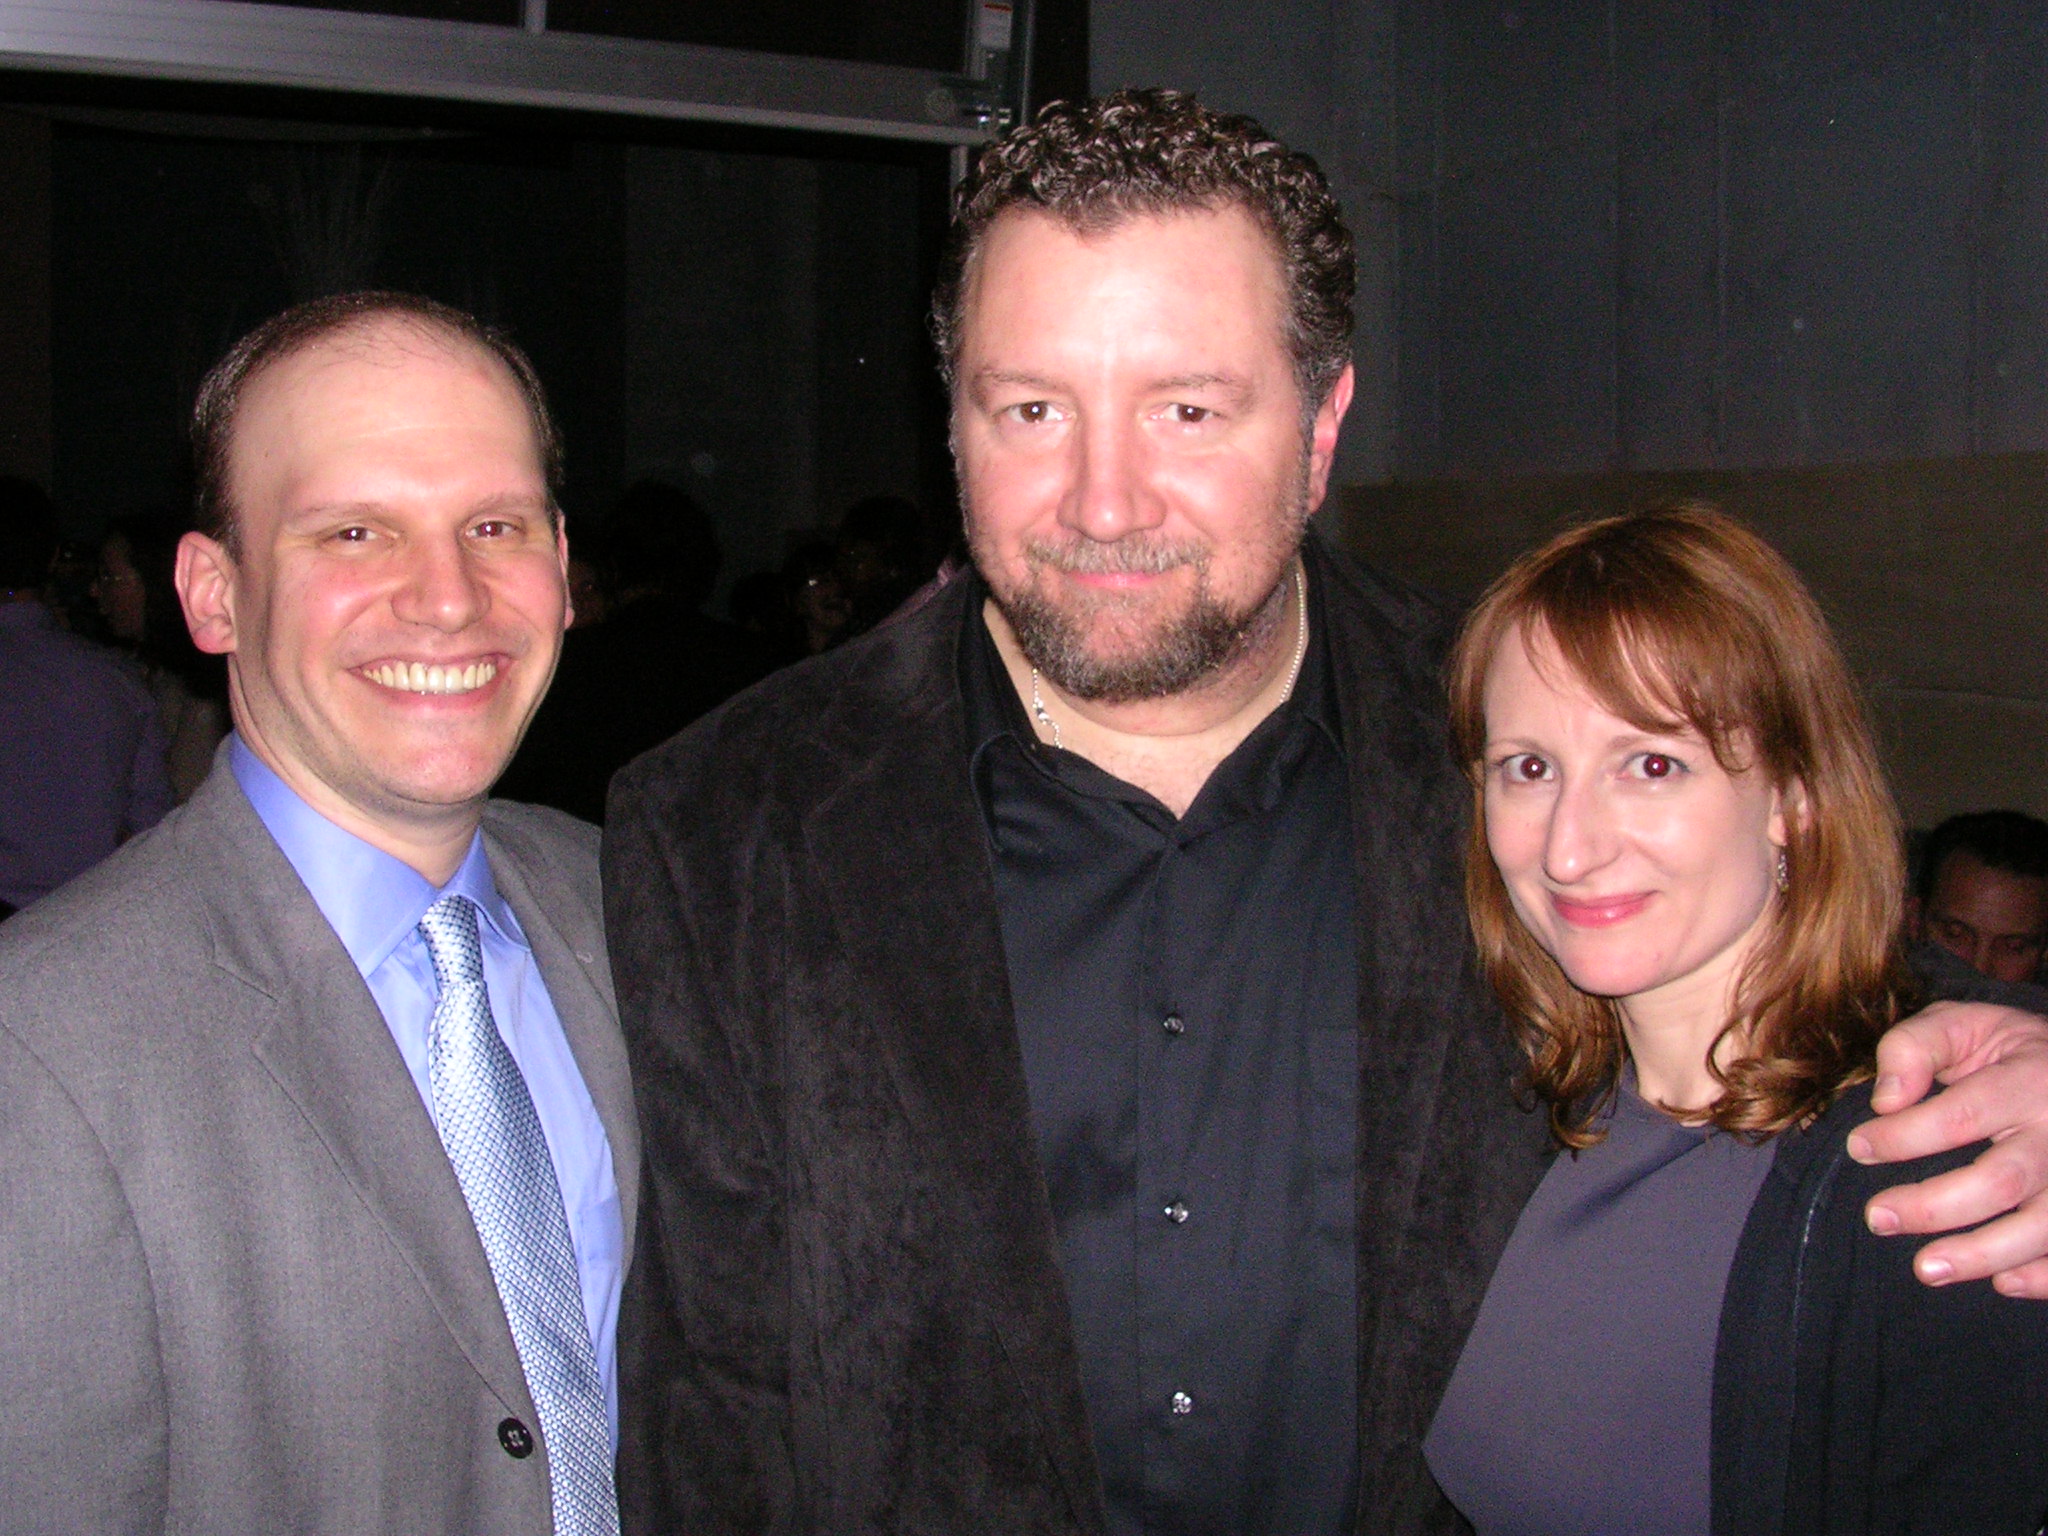 Antonio Meranda, Mike Boland and Dawn McGee at the opening night of 